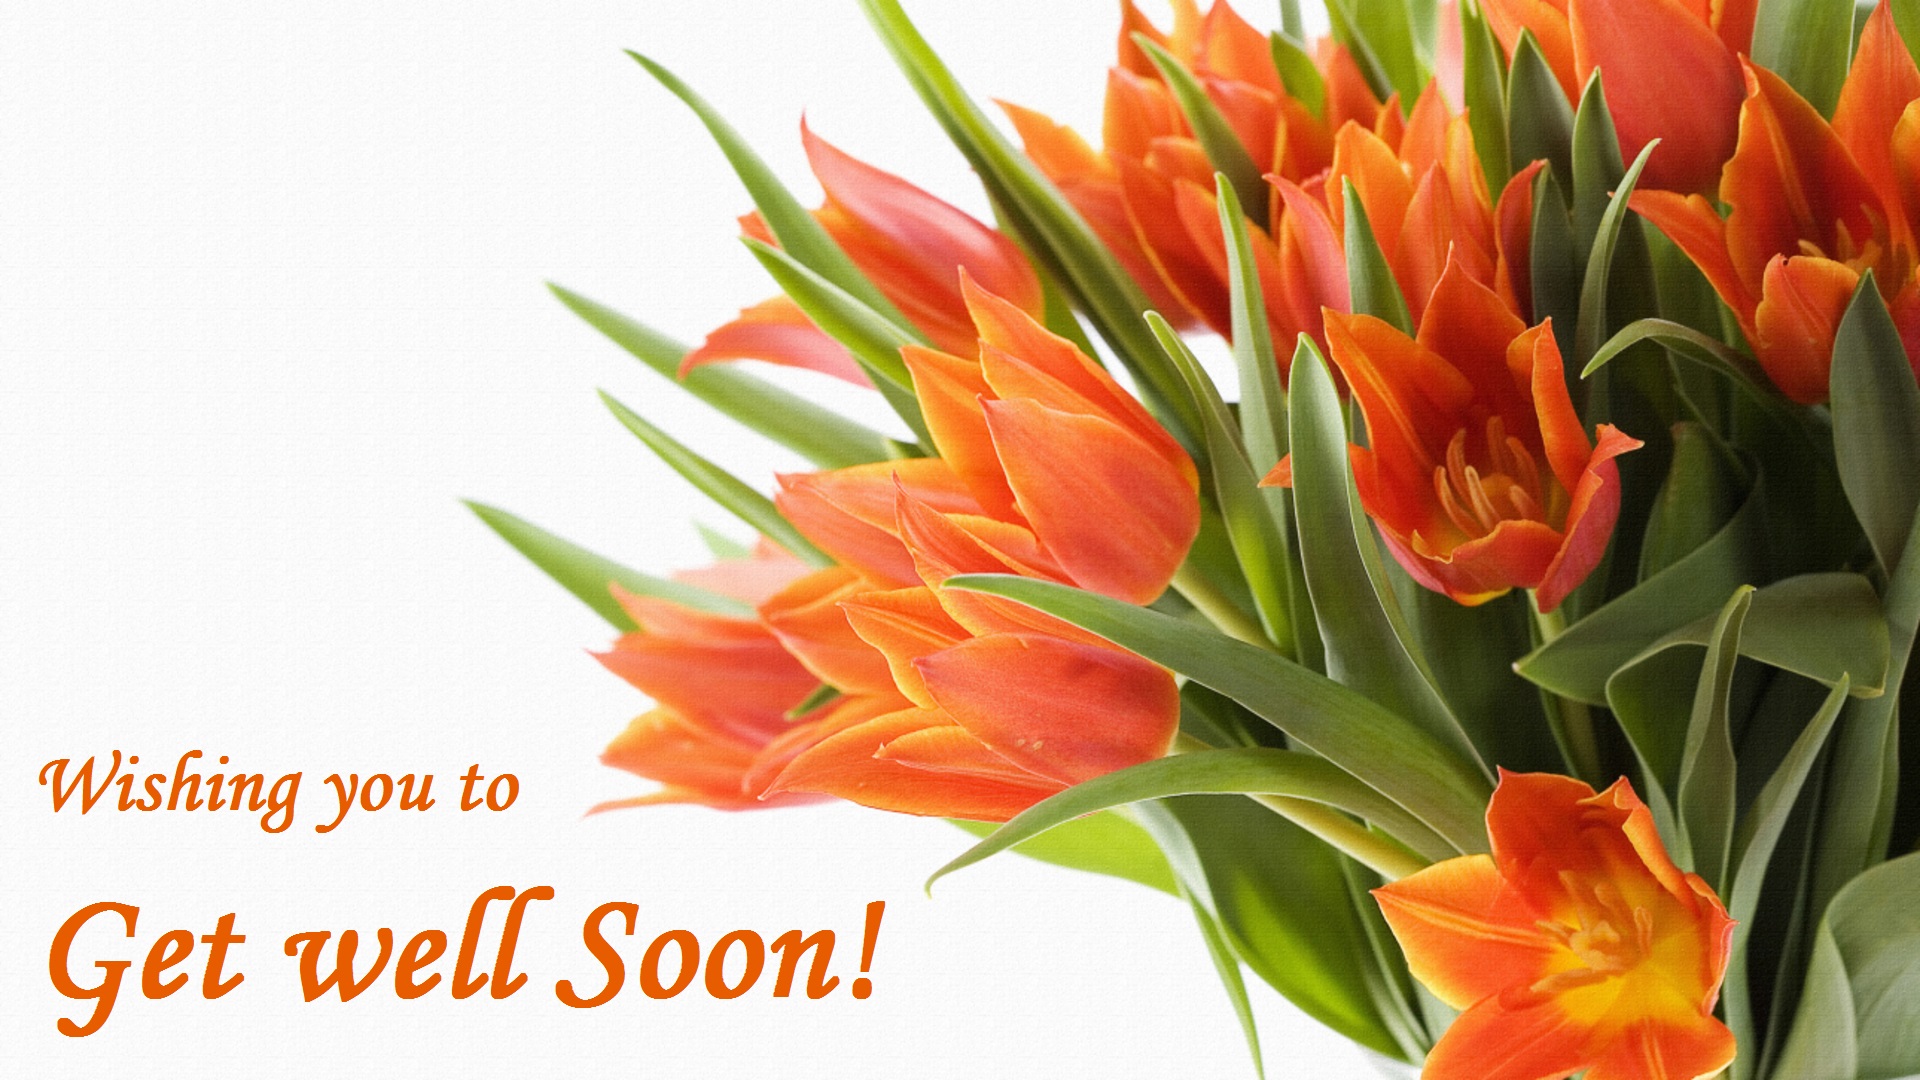 get well soon wishes 2017 hd image